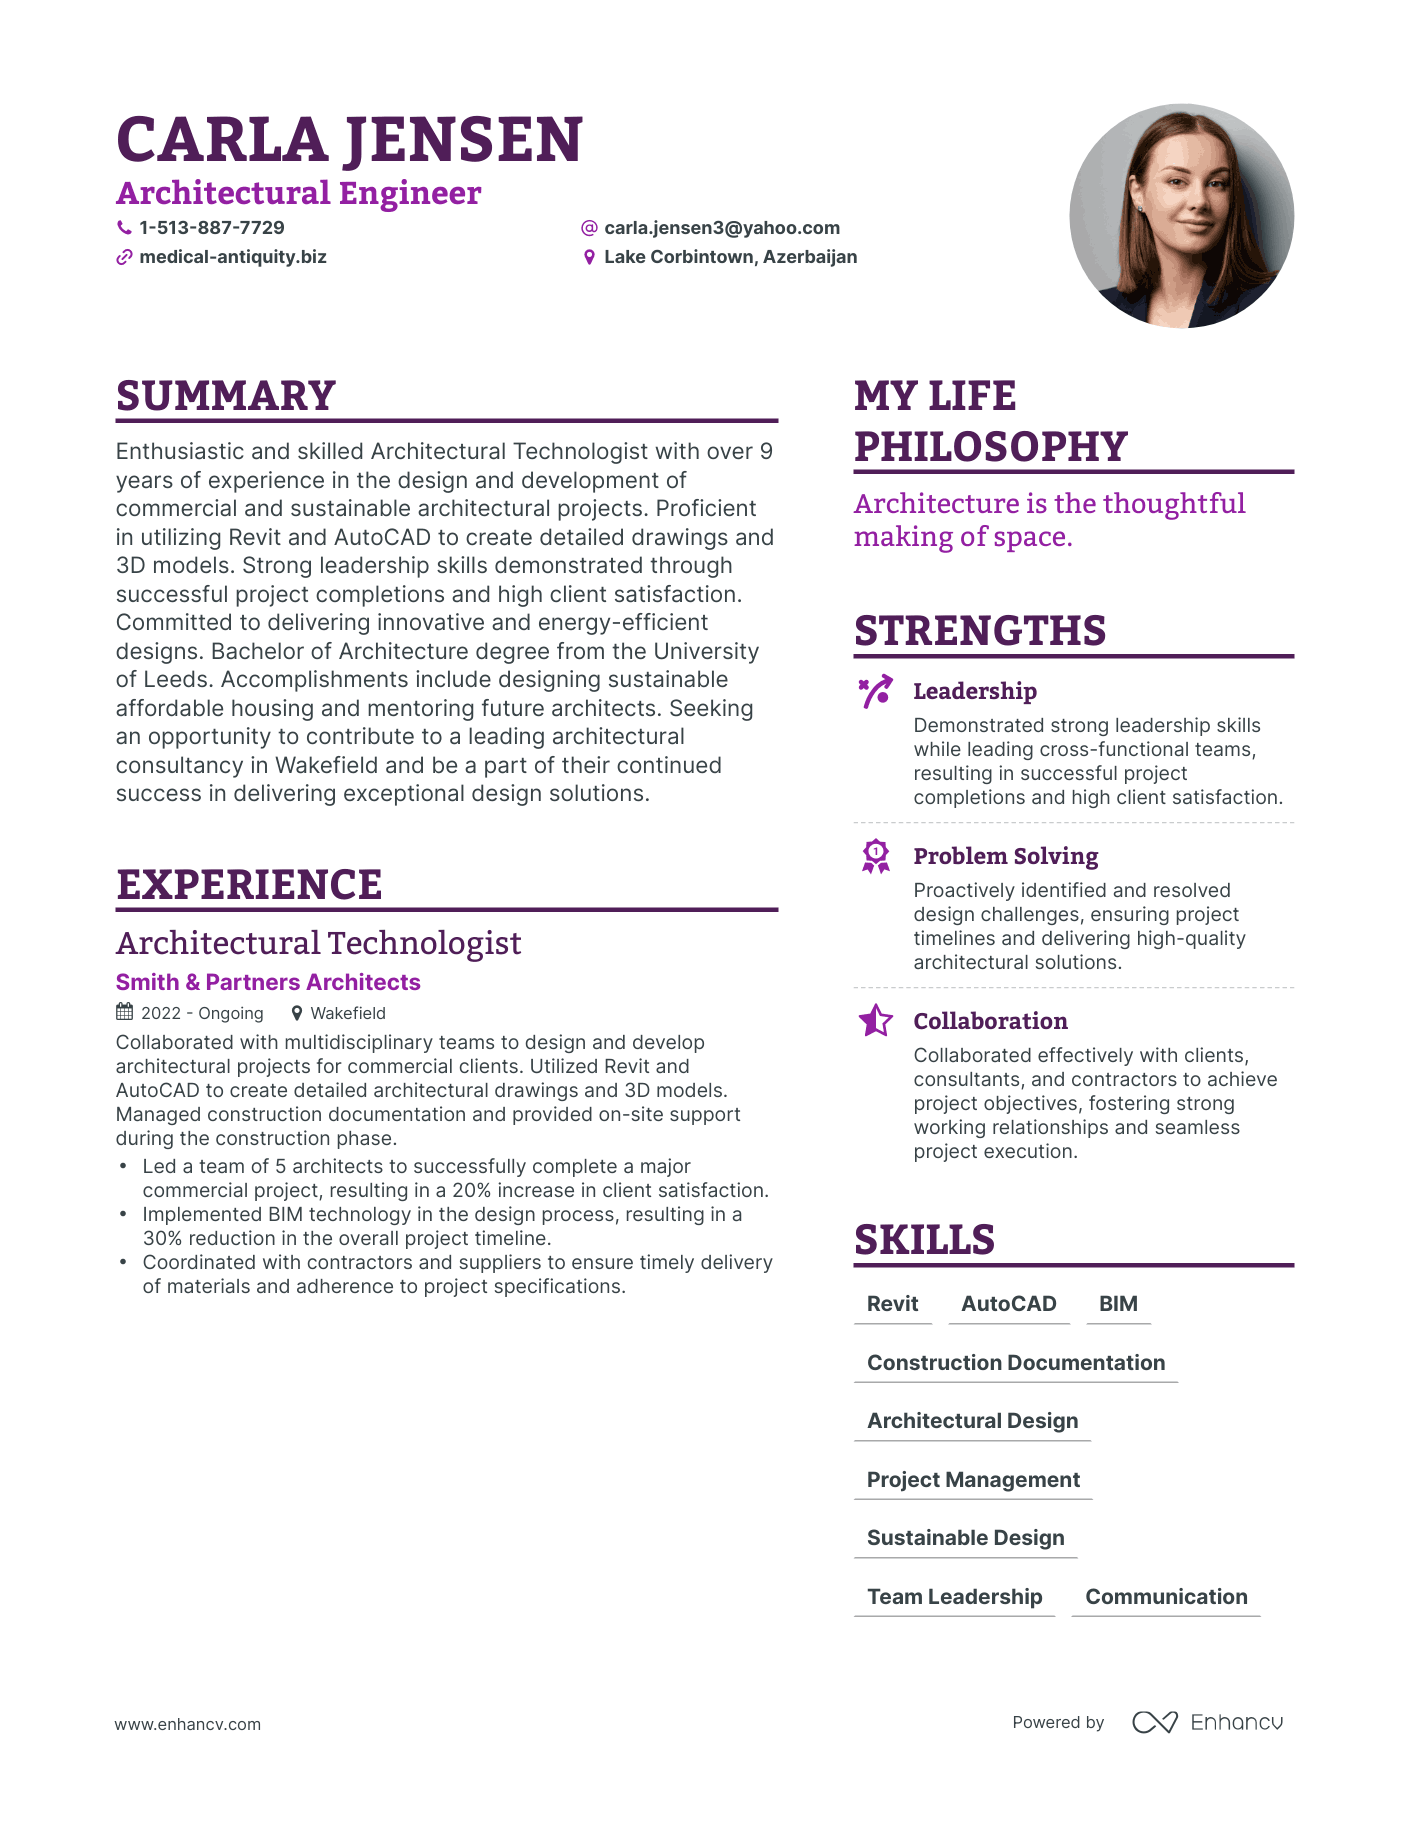 Architectural Engineer resume example